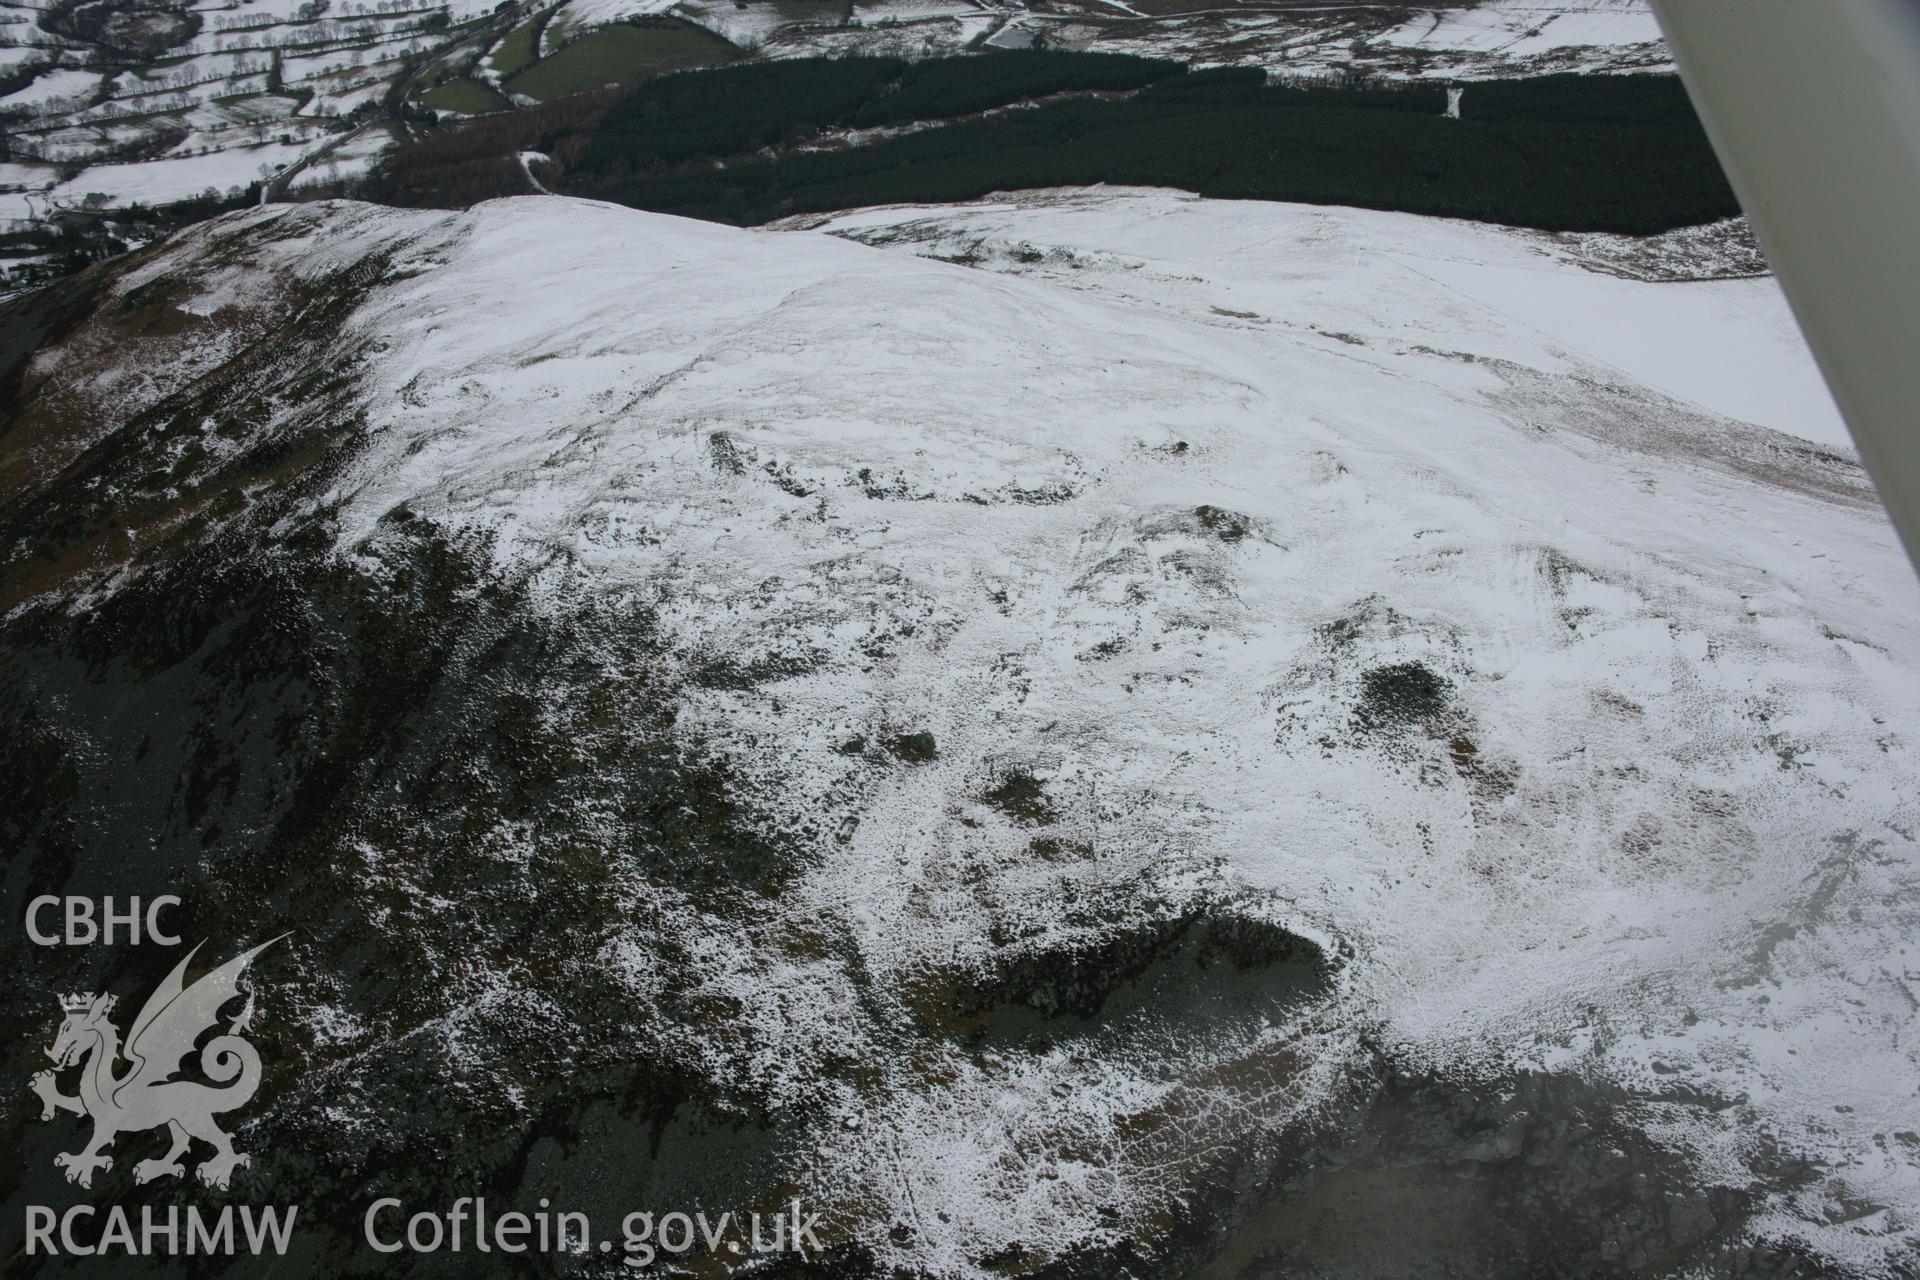 RCAHMW colour oblique aerial photograph of Craig Rhiwarth Hillfort under snow from the south-east. Taken on 06 March 2006 by Toby Driver.